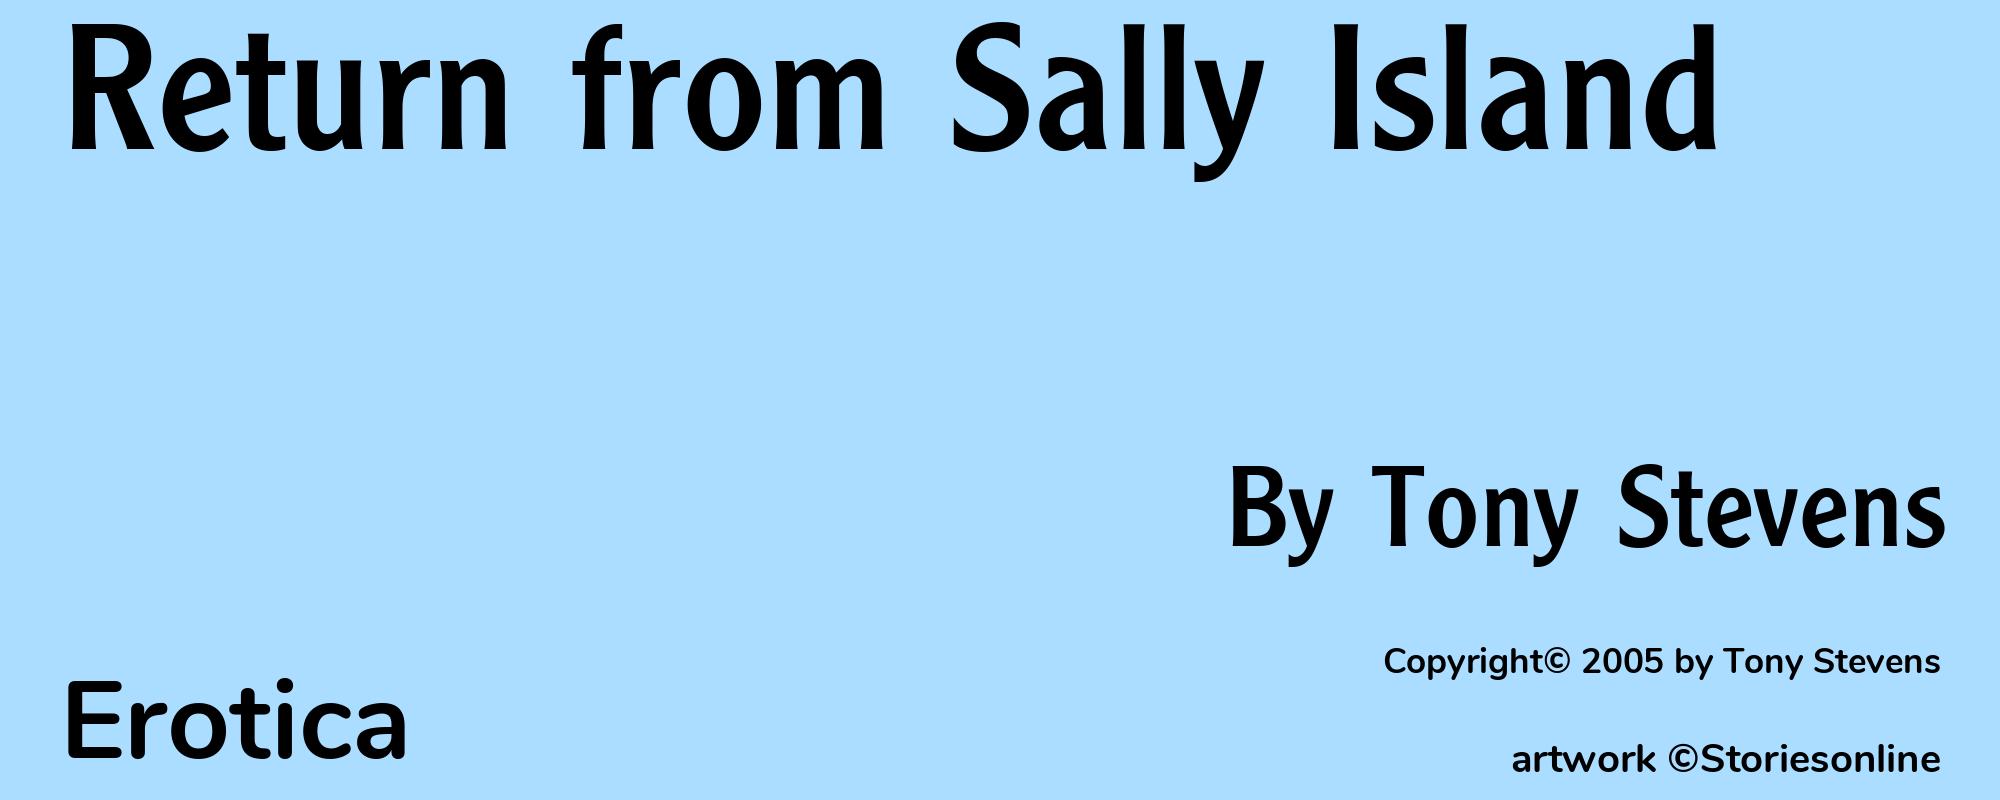 Return from Sally Island - Cover